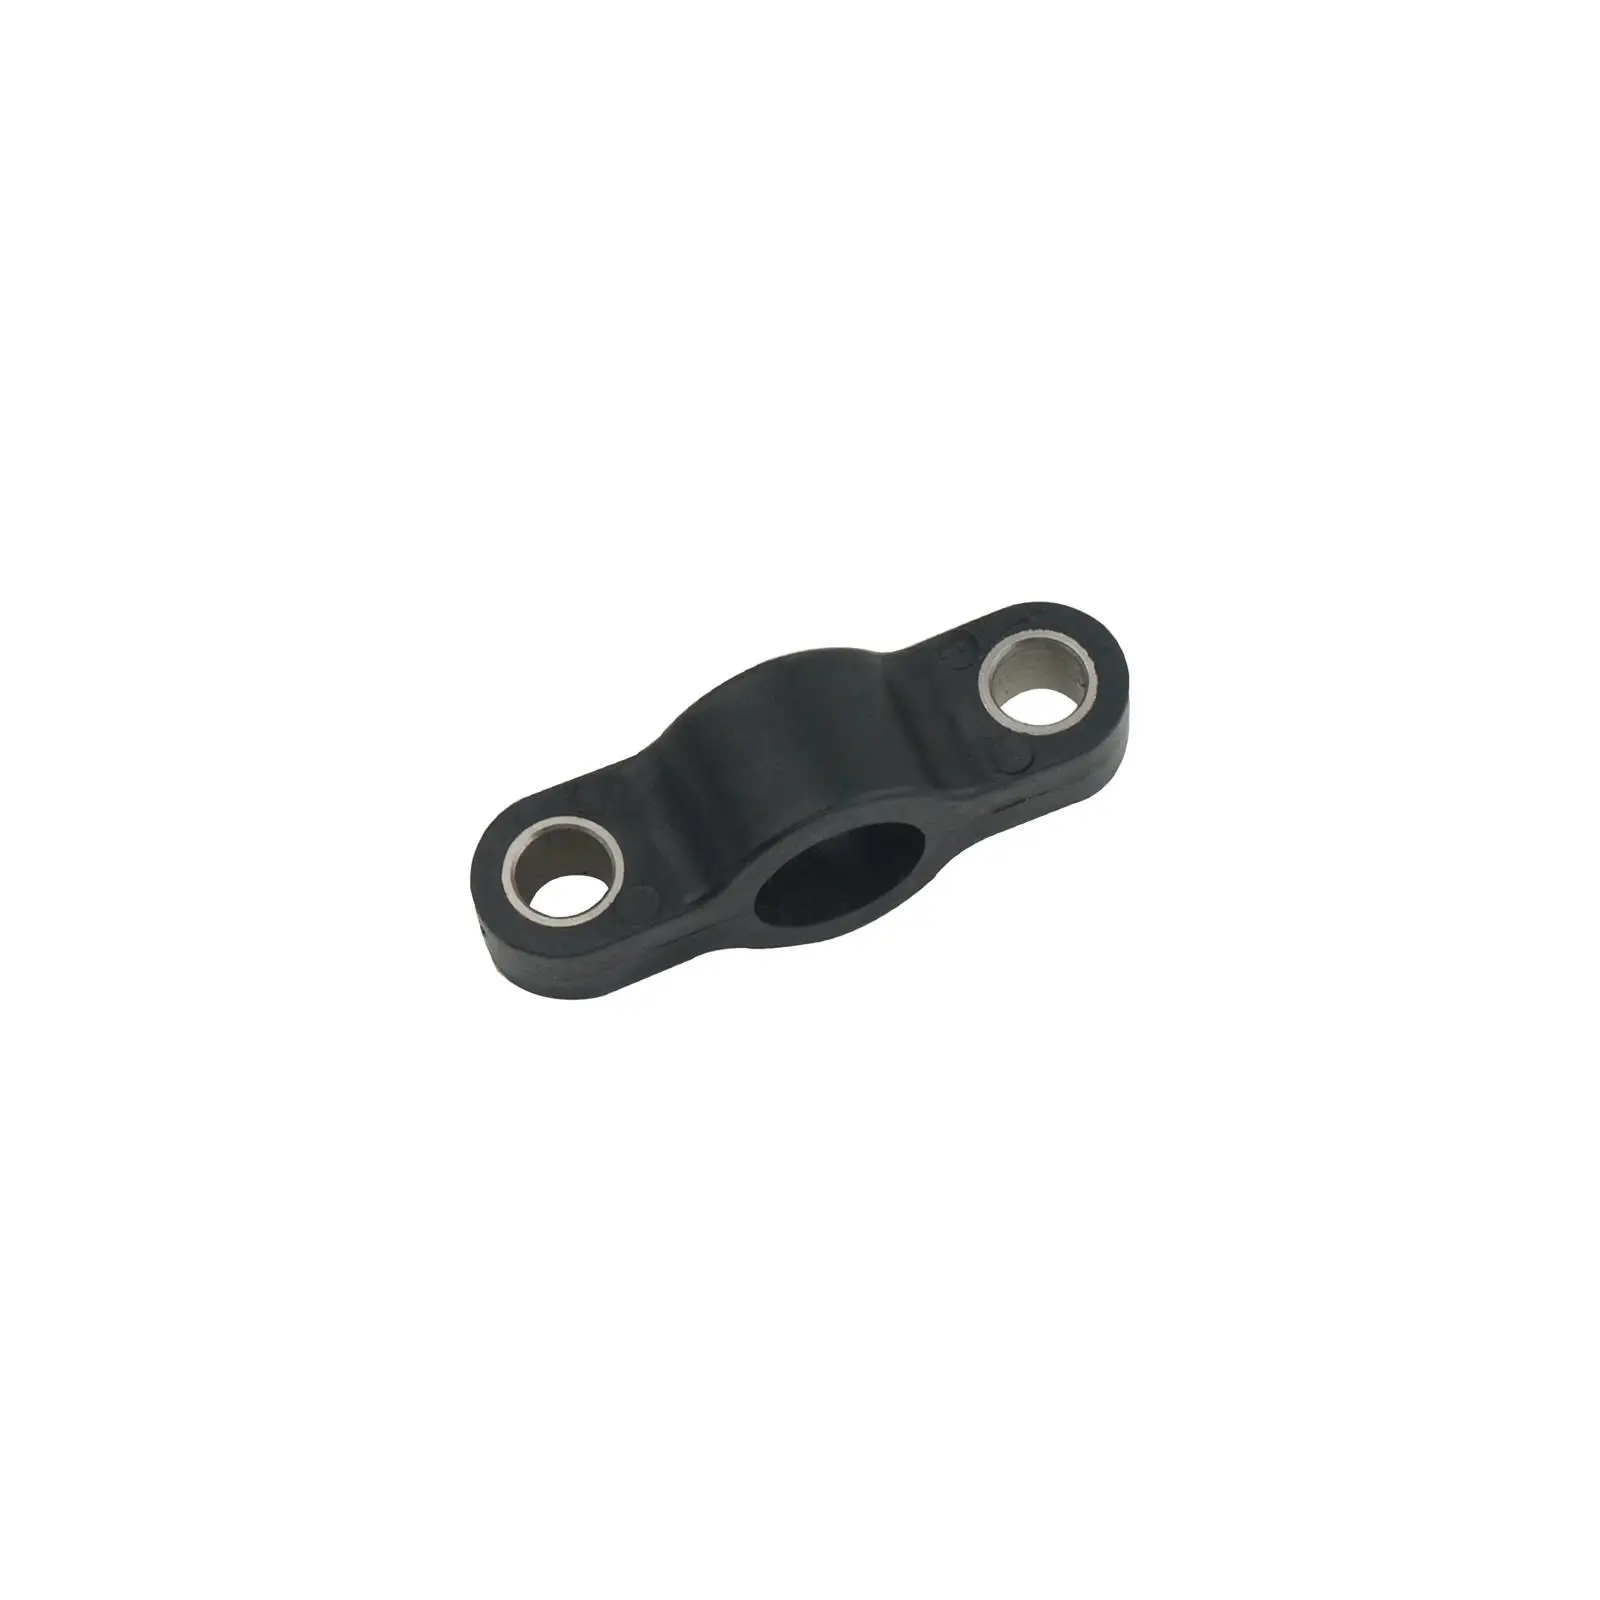 Nylon Bracket 6F5-41662 F15-05040002 for Parsun Engine Stable Performance Boat Repairing Accessory Replacement Black